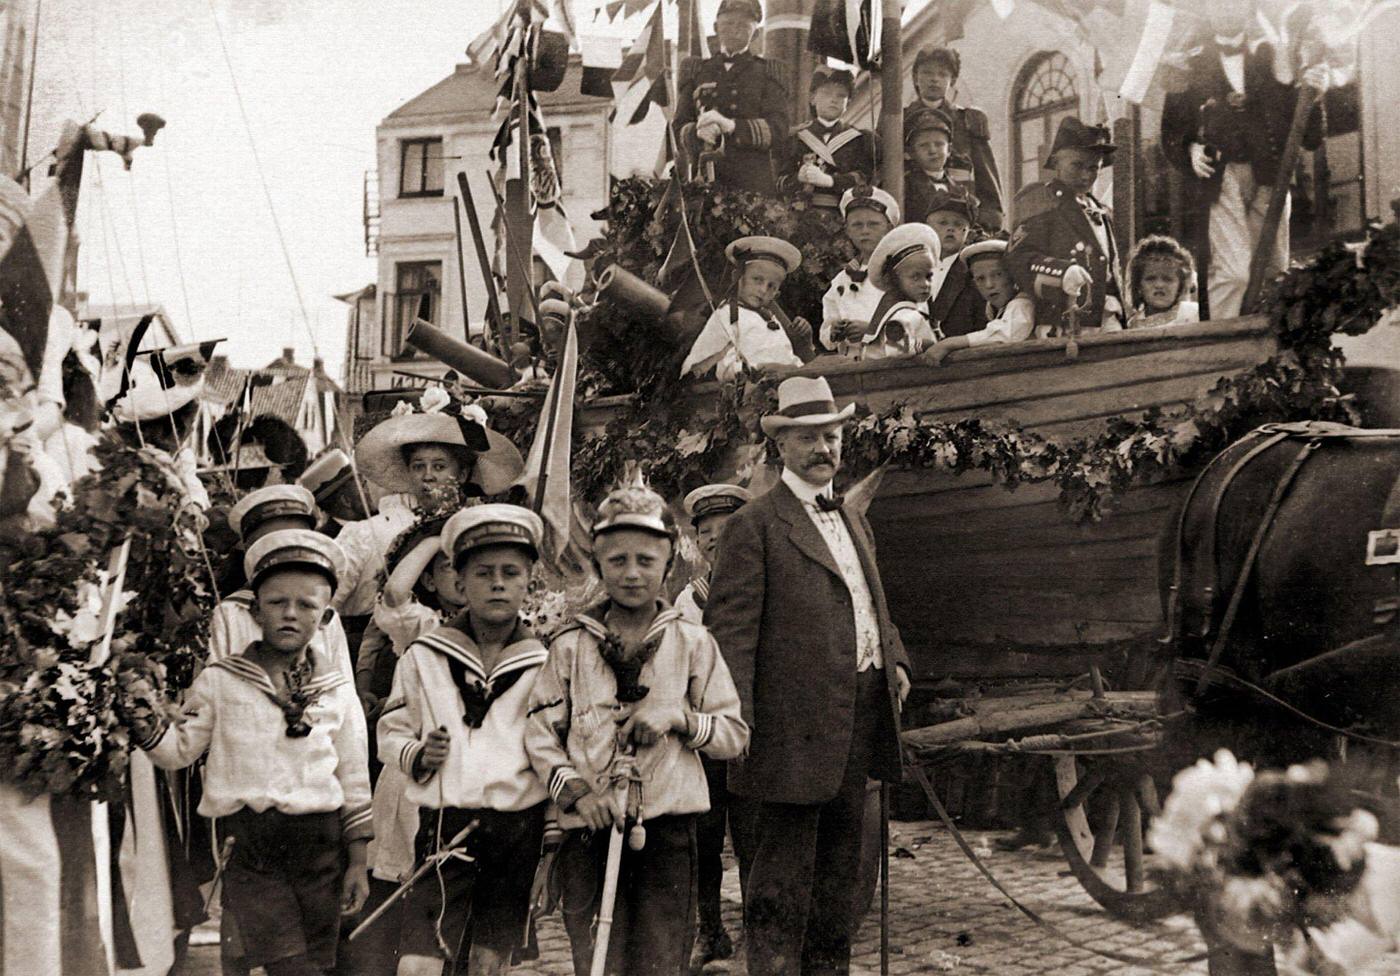 Festival procession with children as sailors in a ship in Hamburg, Germany, 1910